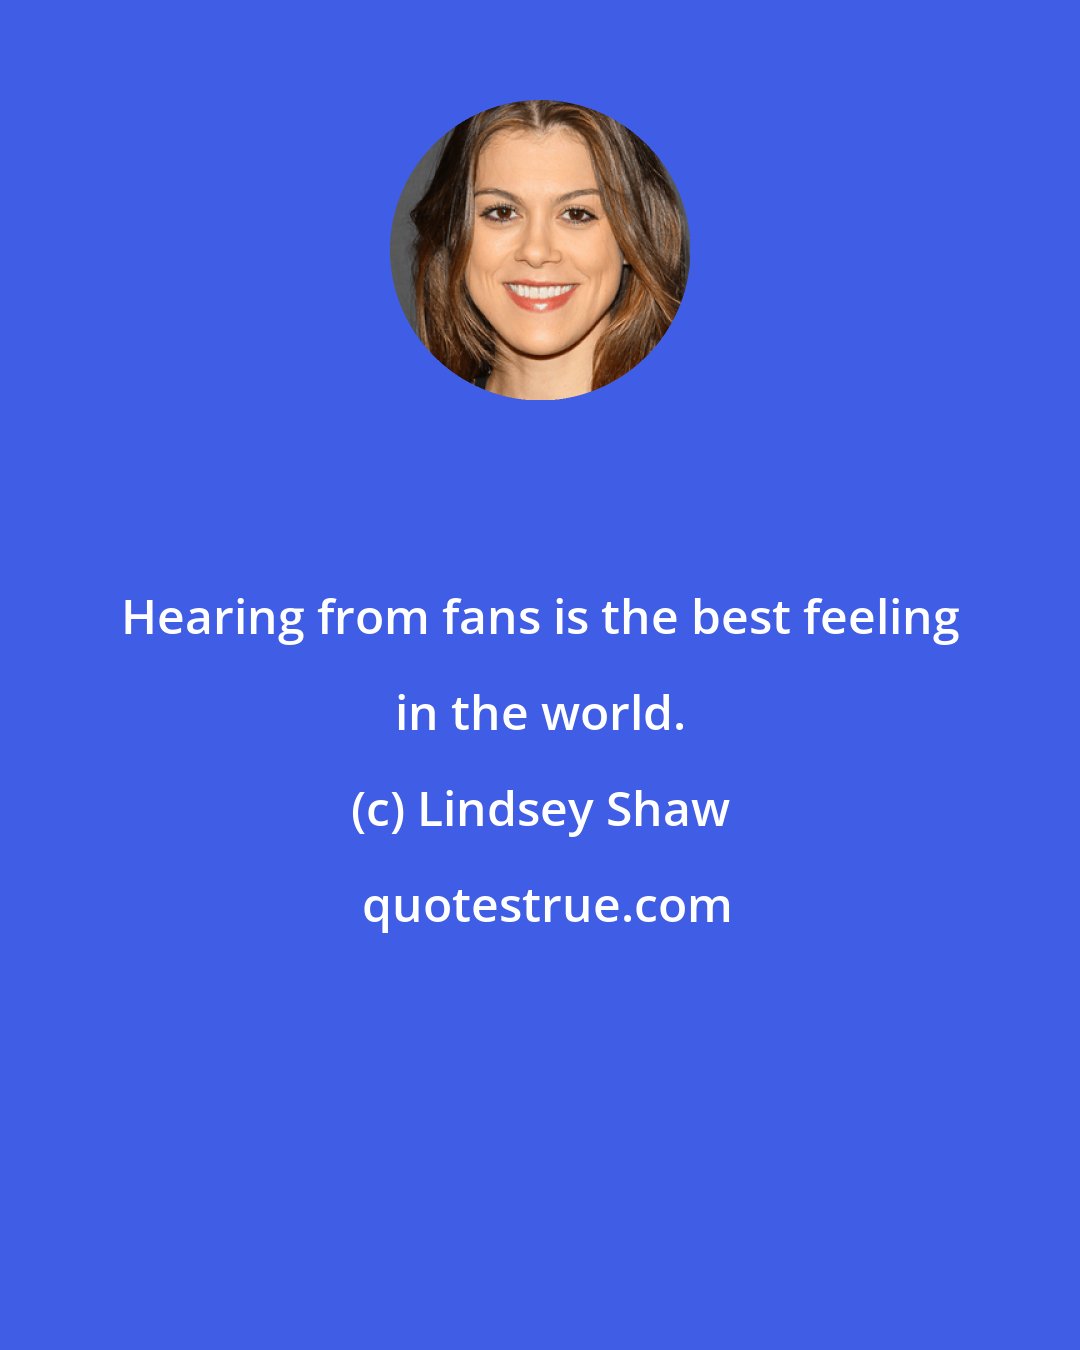 Lindsey Shaw: Hearing from fans is the best feeling in the world.